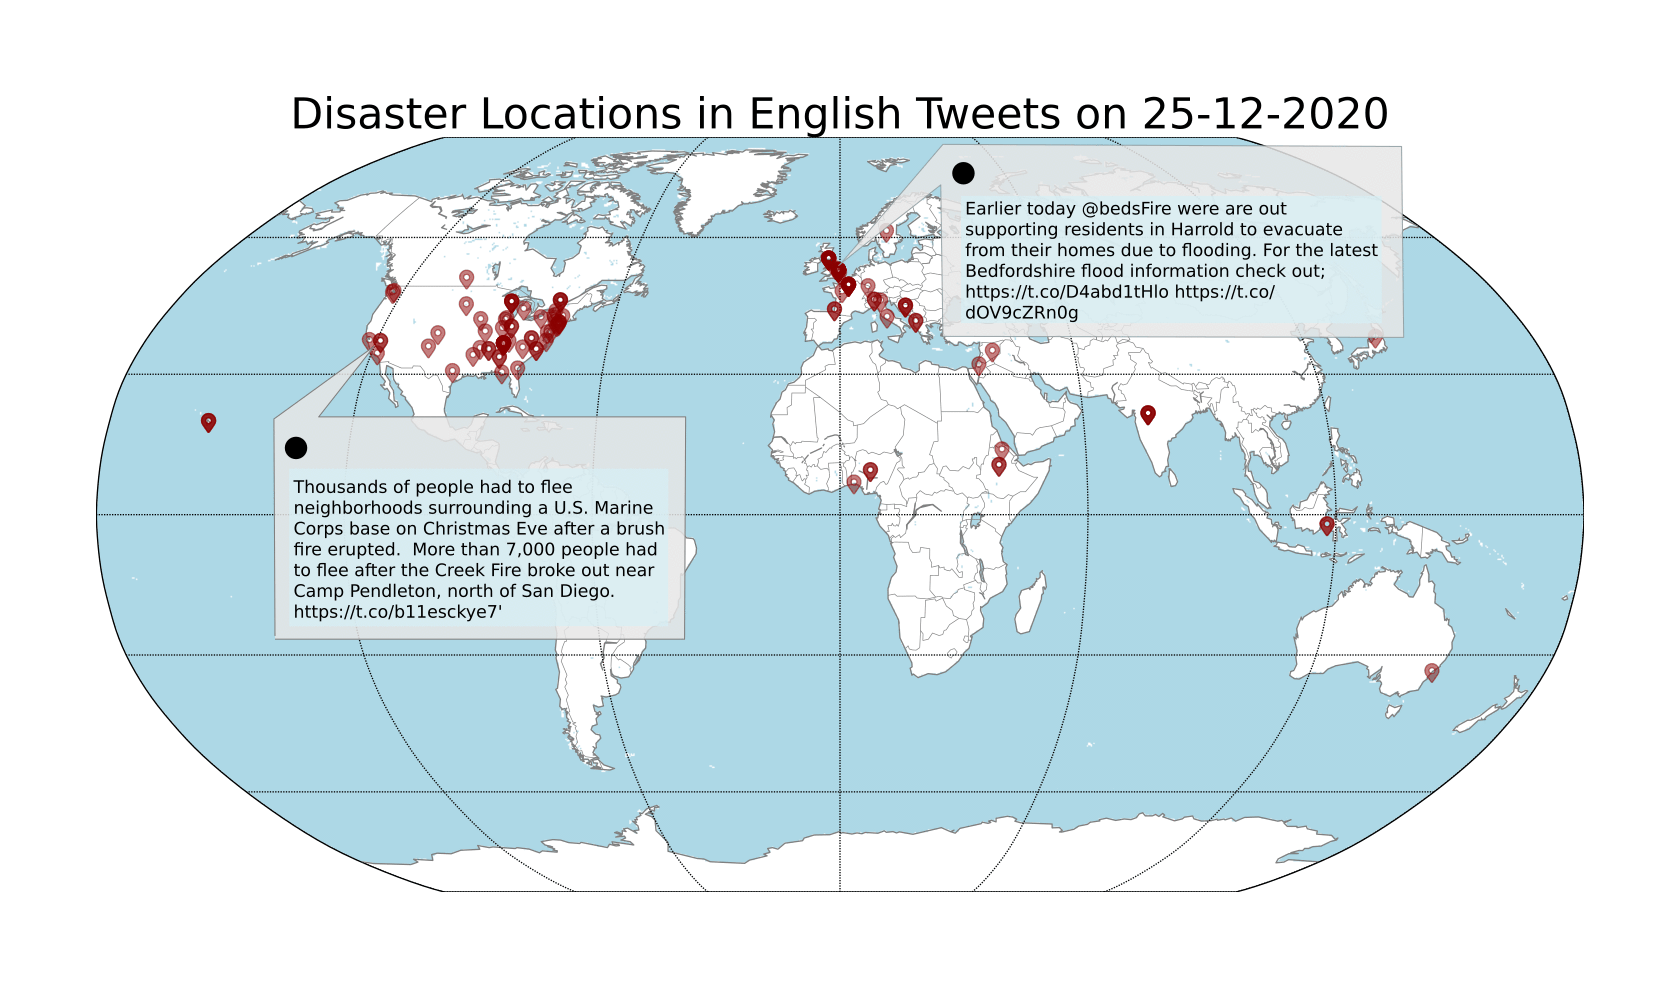 Disaster locations in tweets